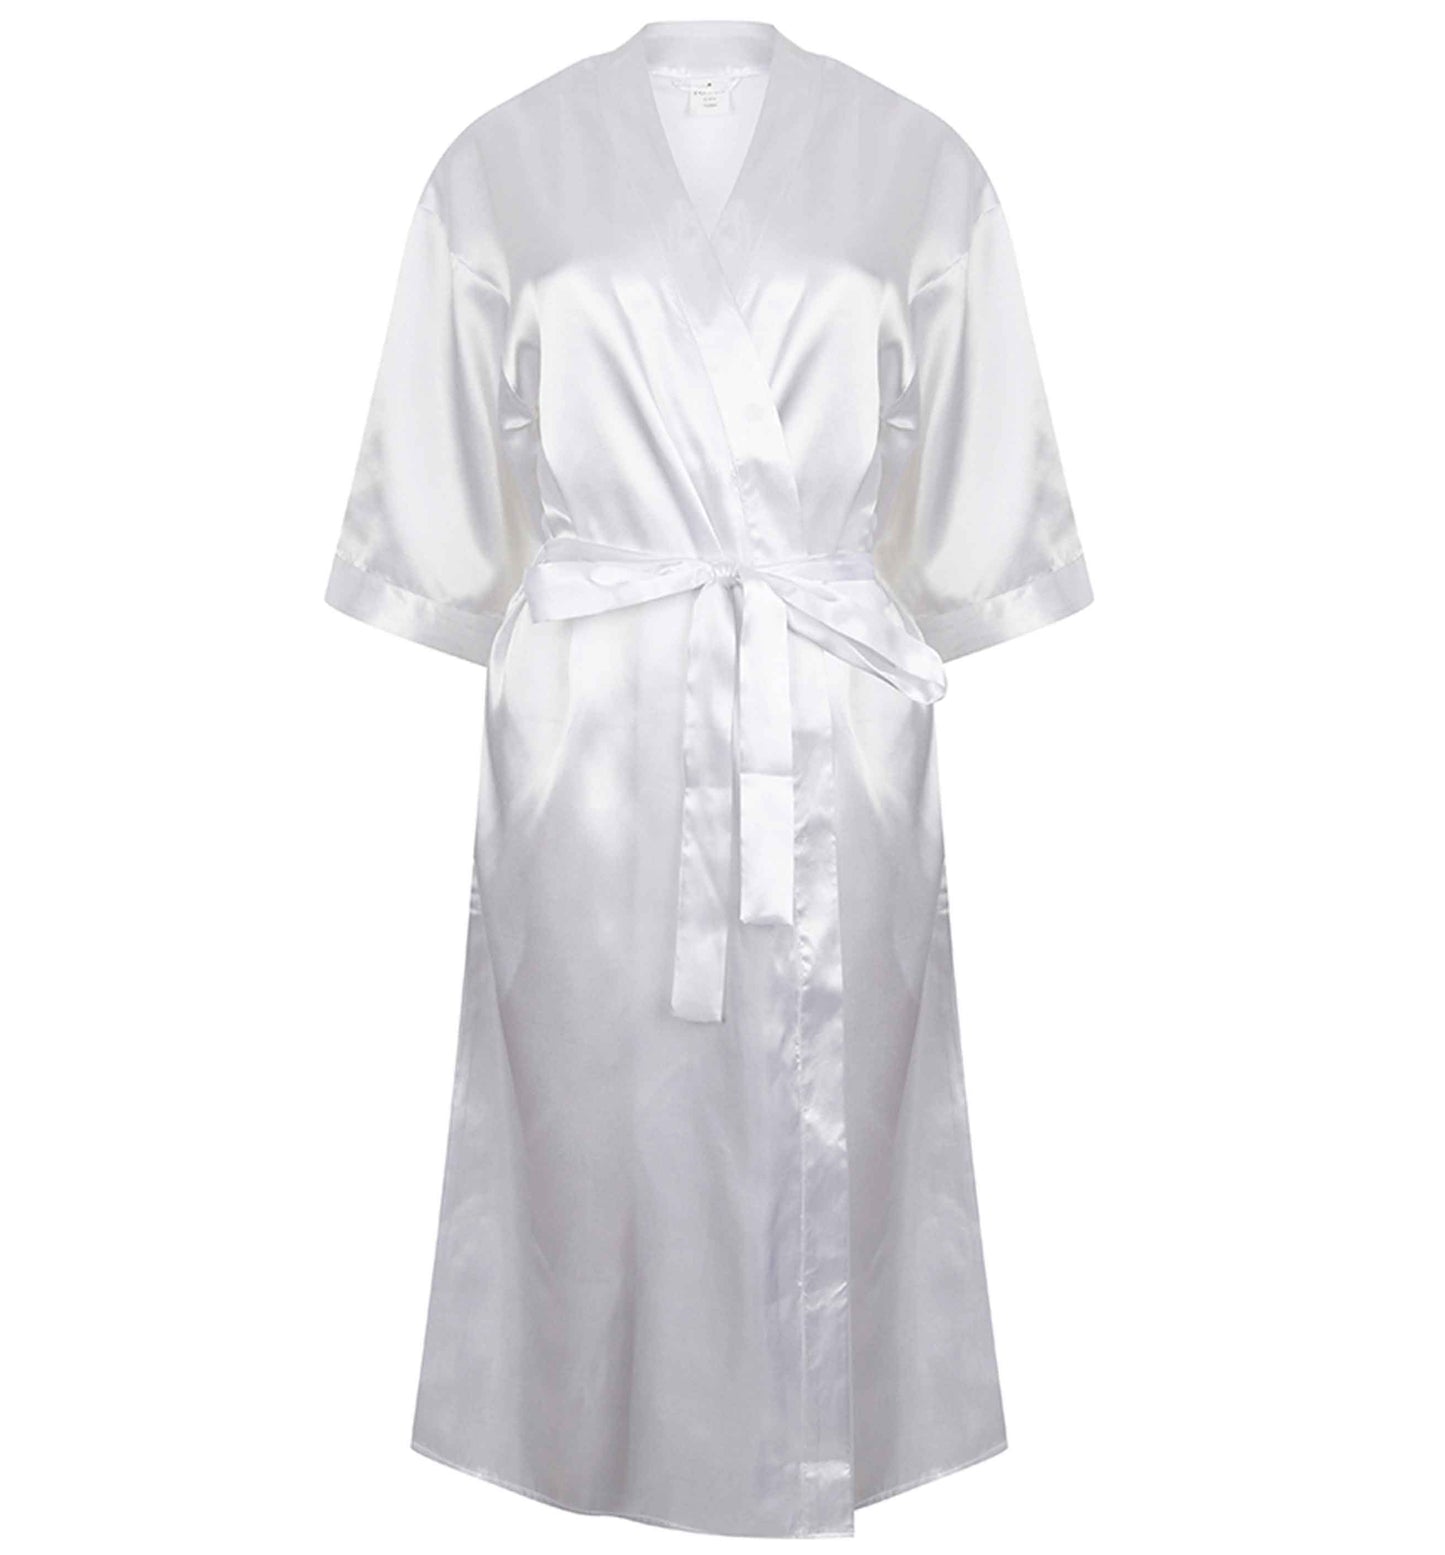 Mrs in it forever personalised date  | 8-18 | Kimono style satin robe | Ladies dressing gown